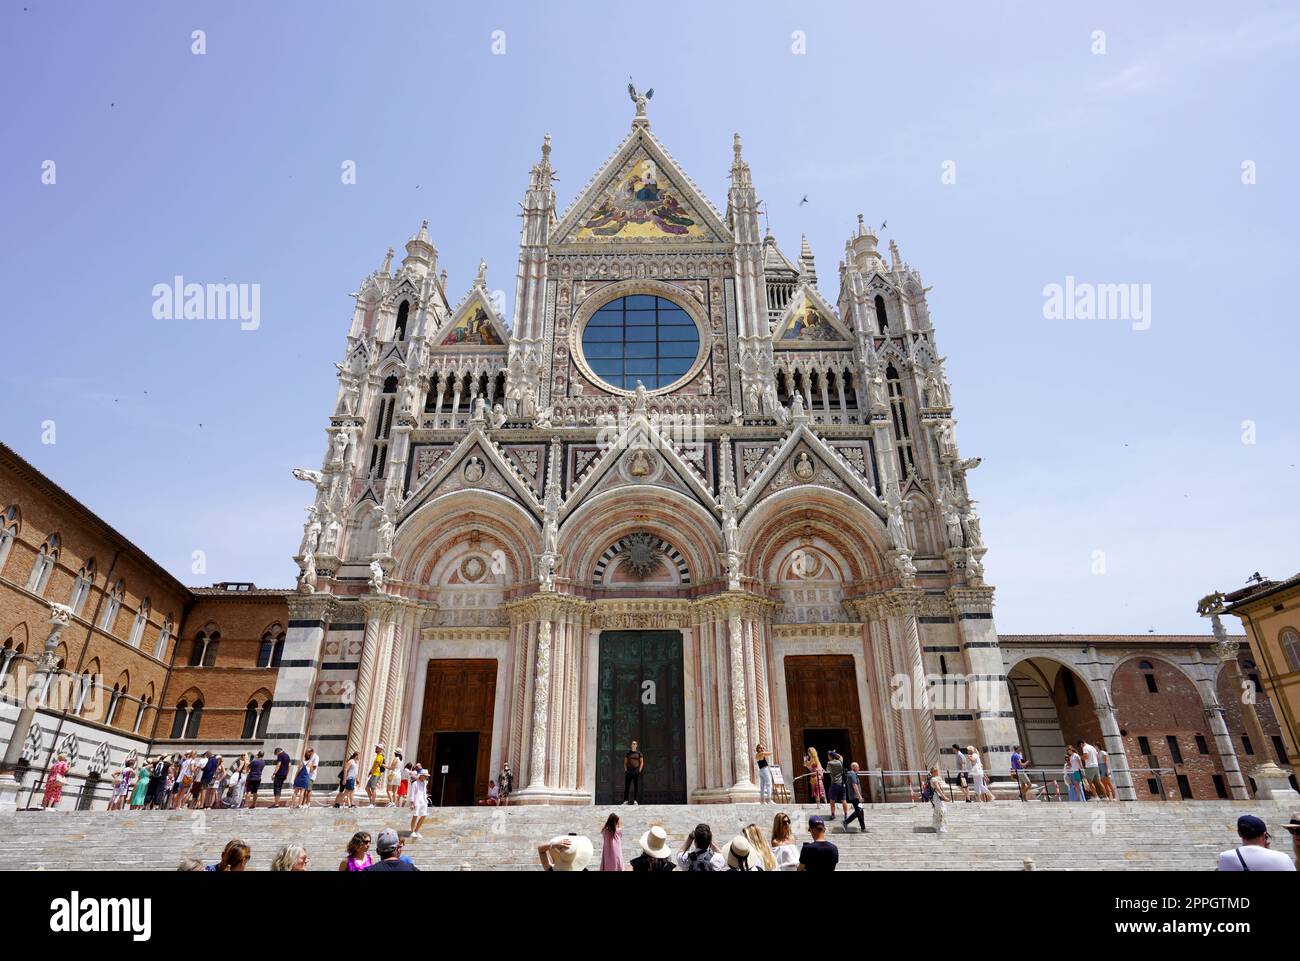 SIENA, ITALY - JUNE 22, 2022: Frontal view of Siena Cathedral in Tuscany, Italy Stock Photo